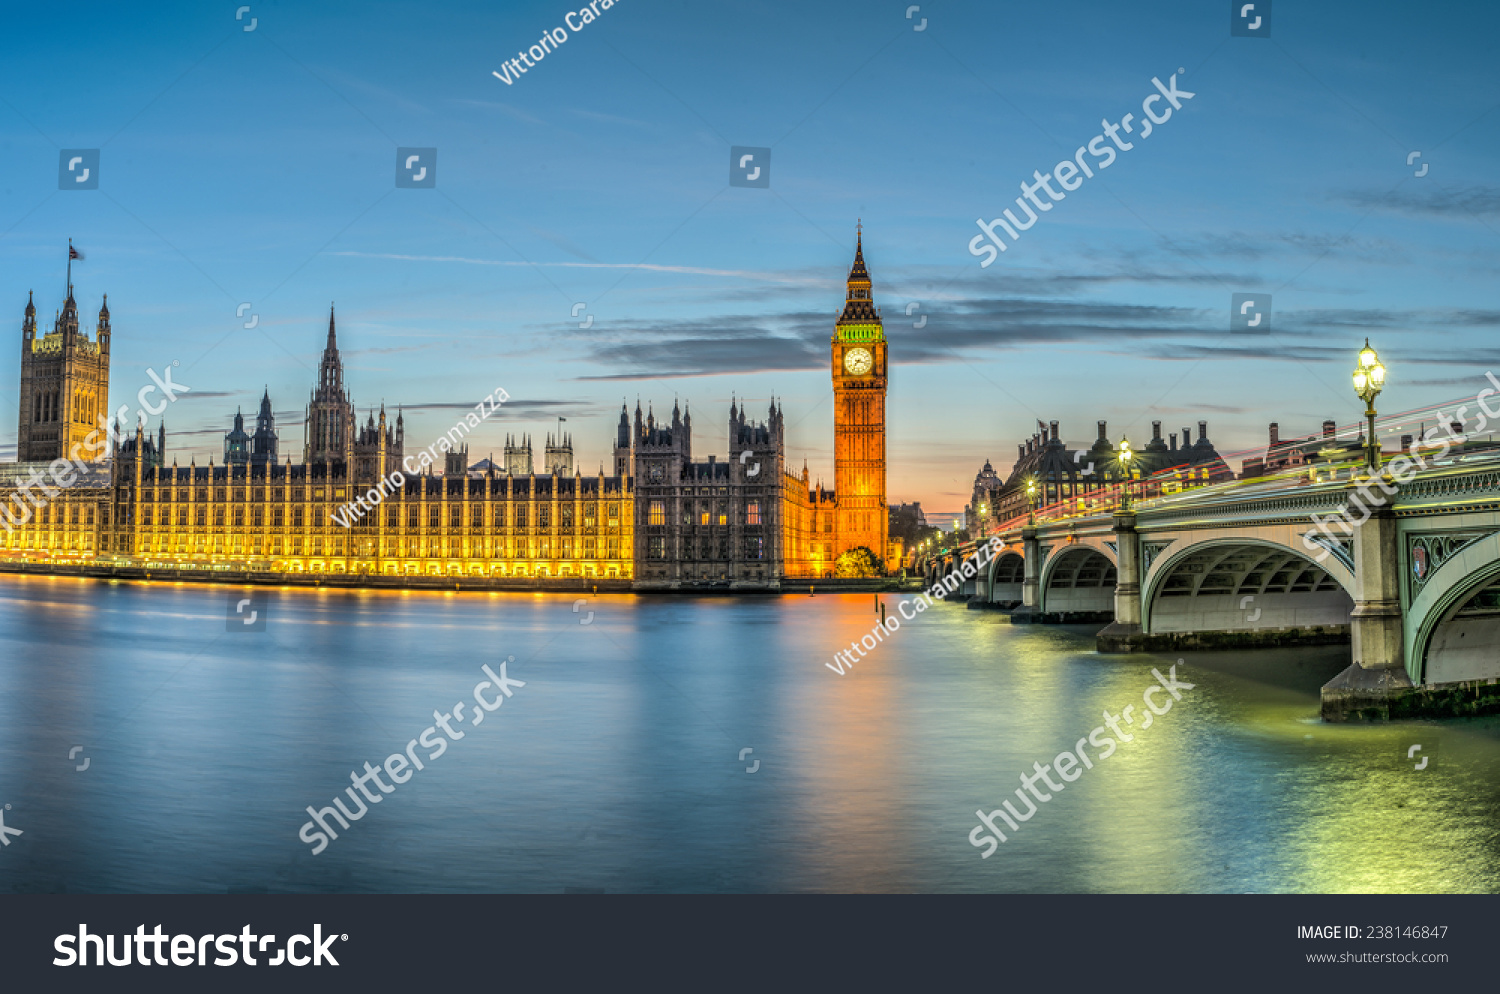 London, the House of Parliament, with the Big Ben and Westminster bridge at dusk #238146847